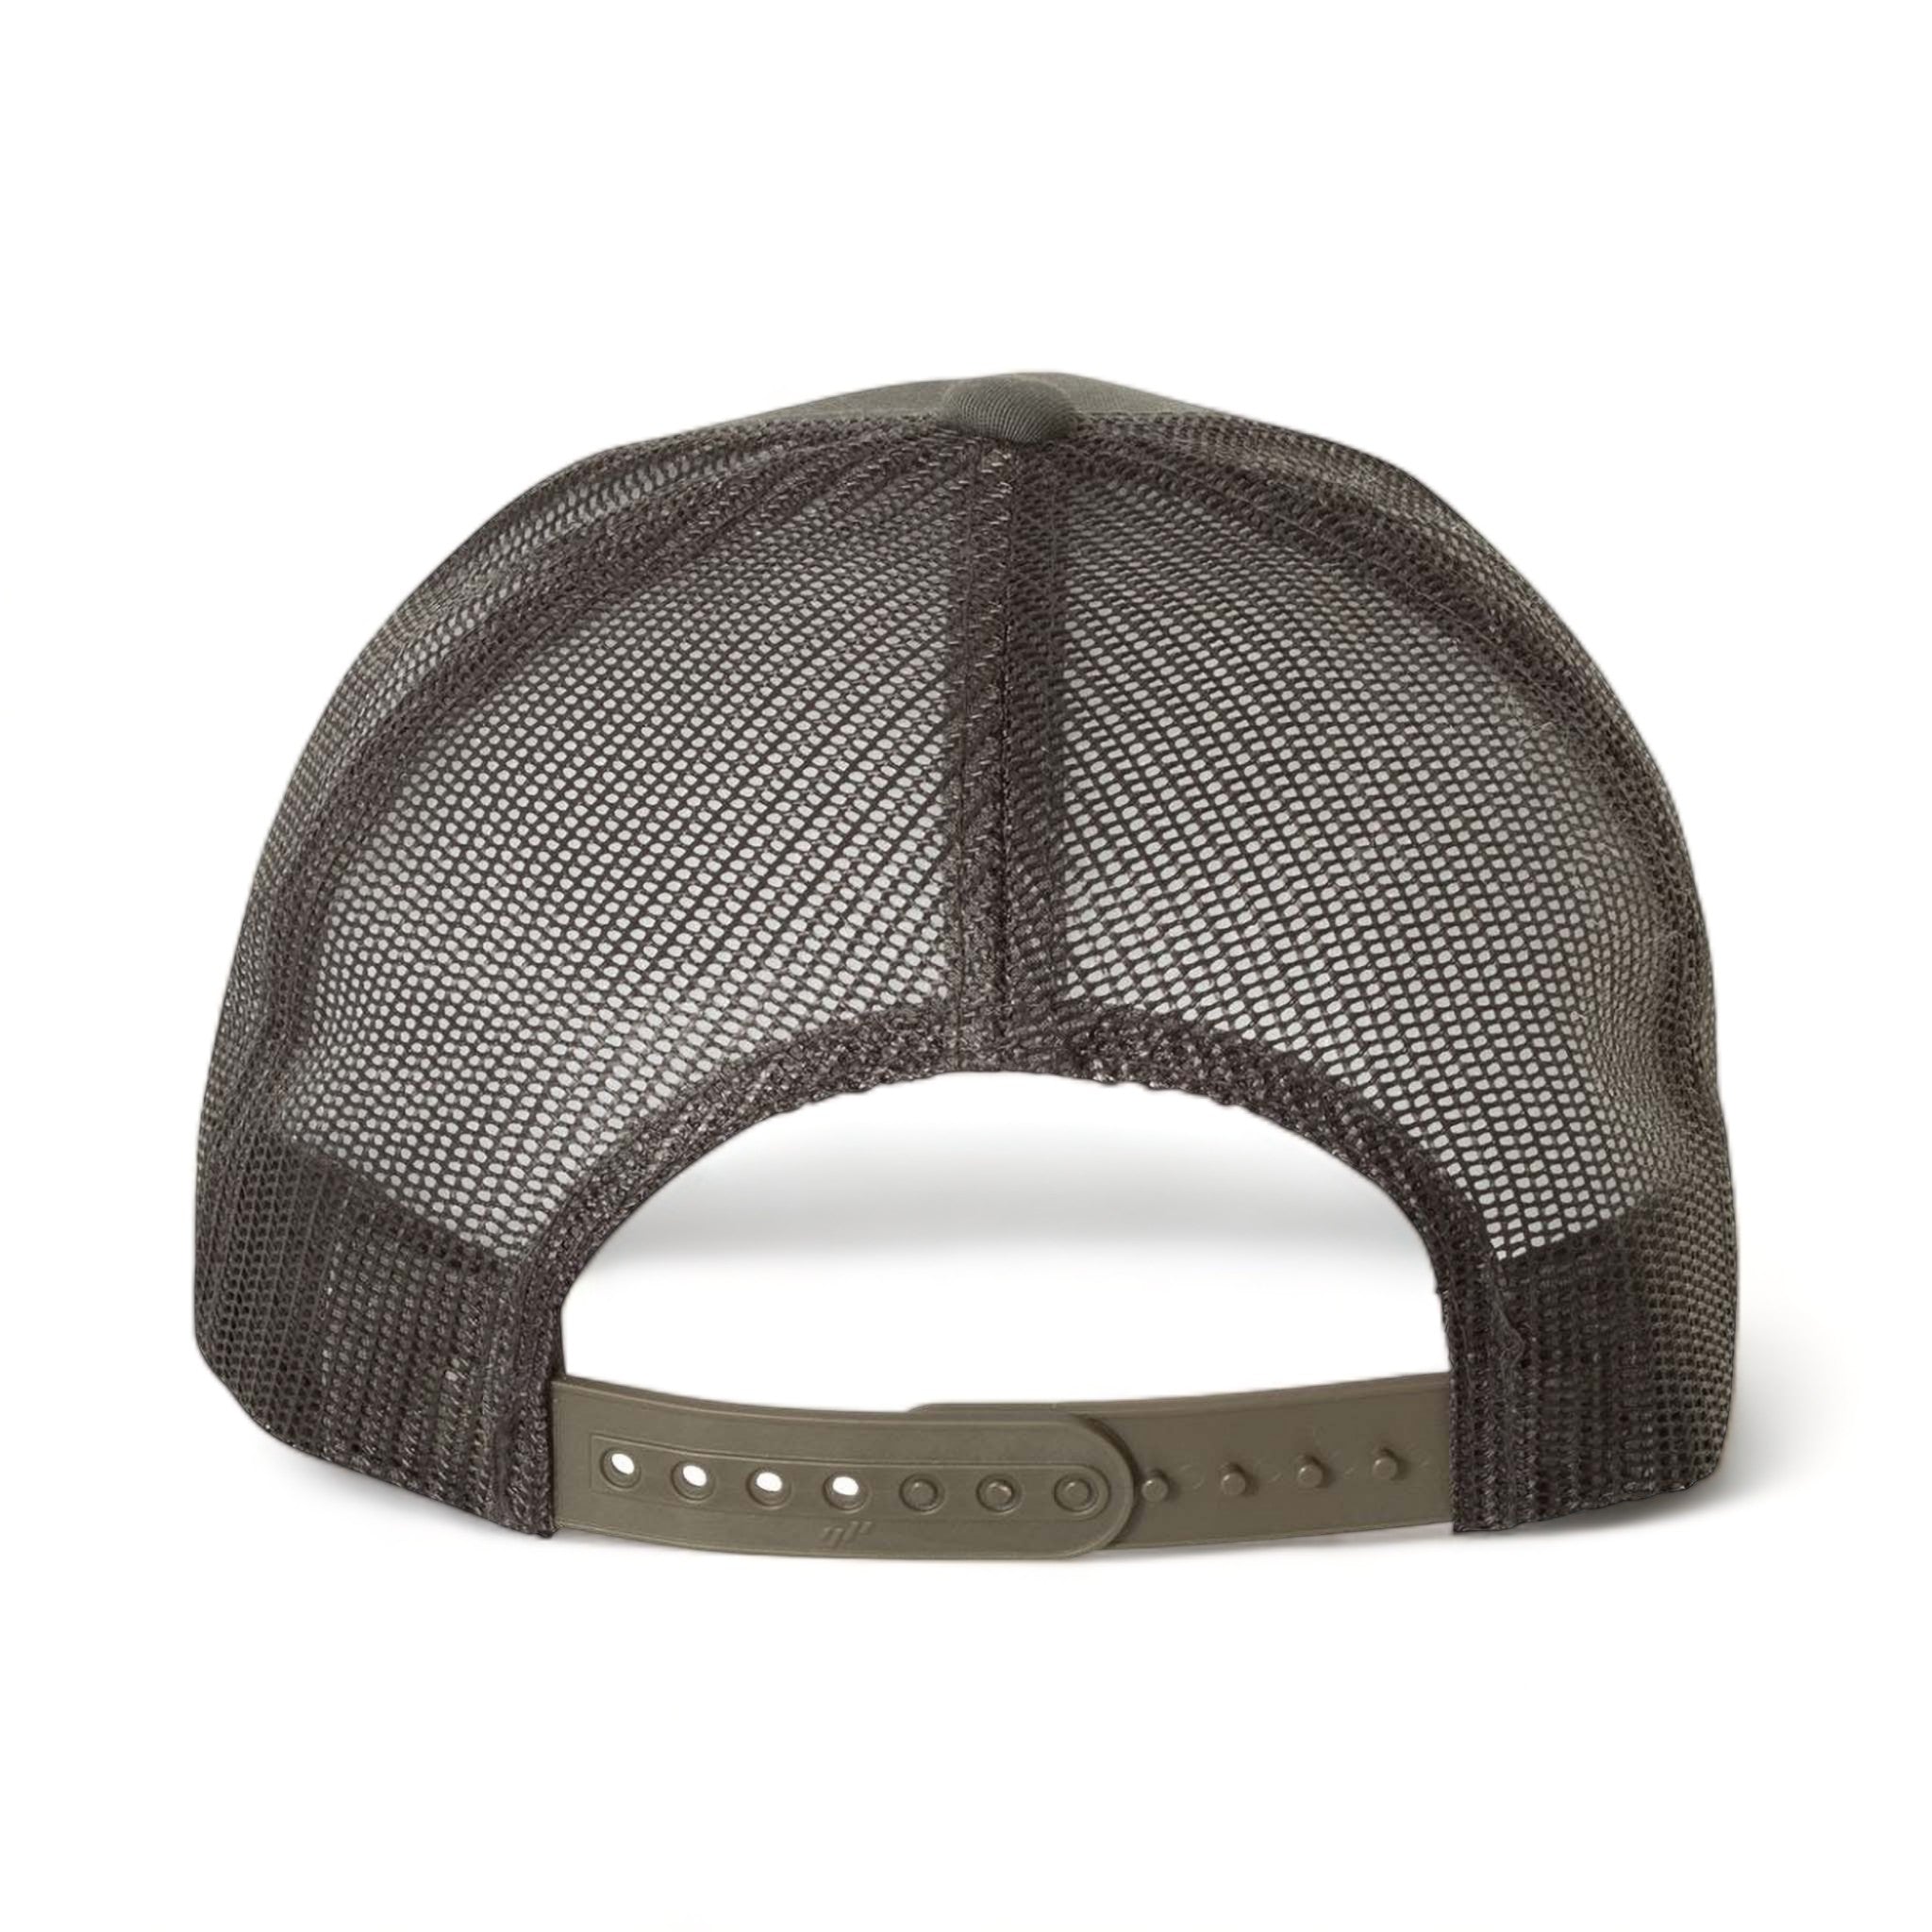 Back view of YP Classics 6506 custom hat in charcoal